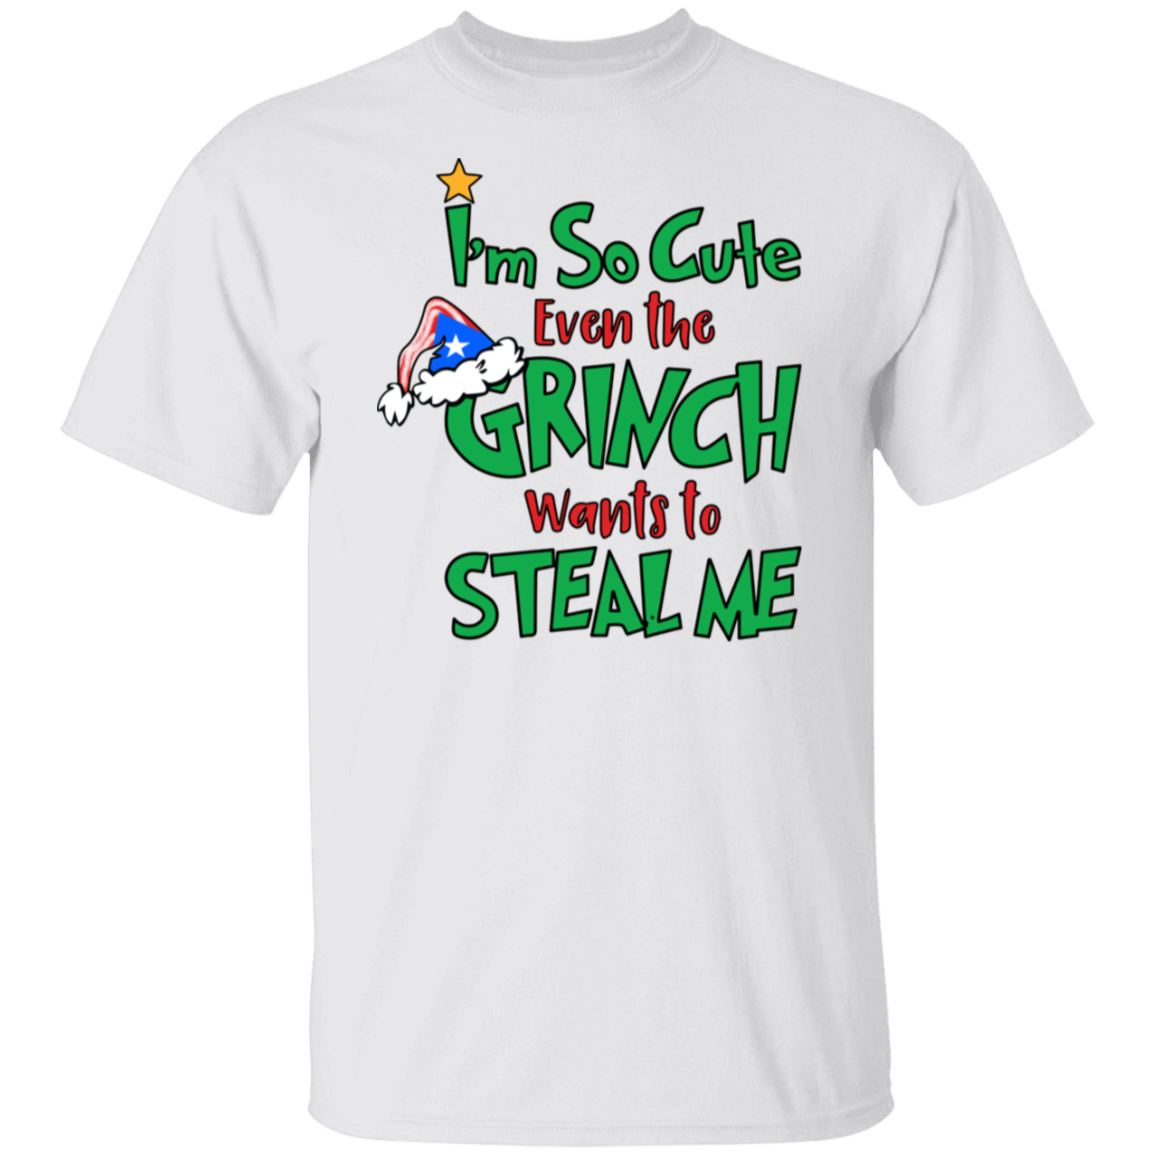 I'm So Cute The Grinch Wants to Steal Me T-Shirt